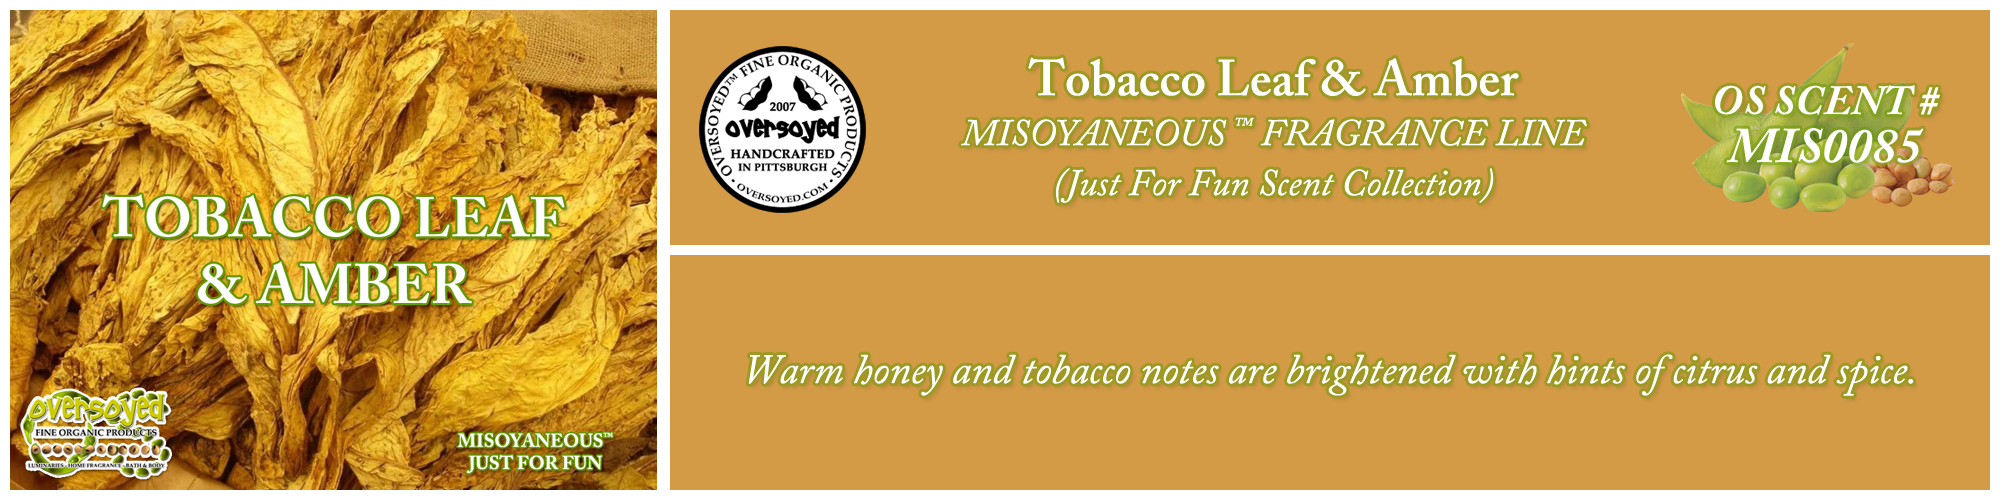 Tobacco Leaf & Amber Handcrafted Products Collection